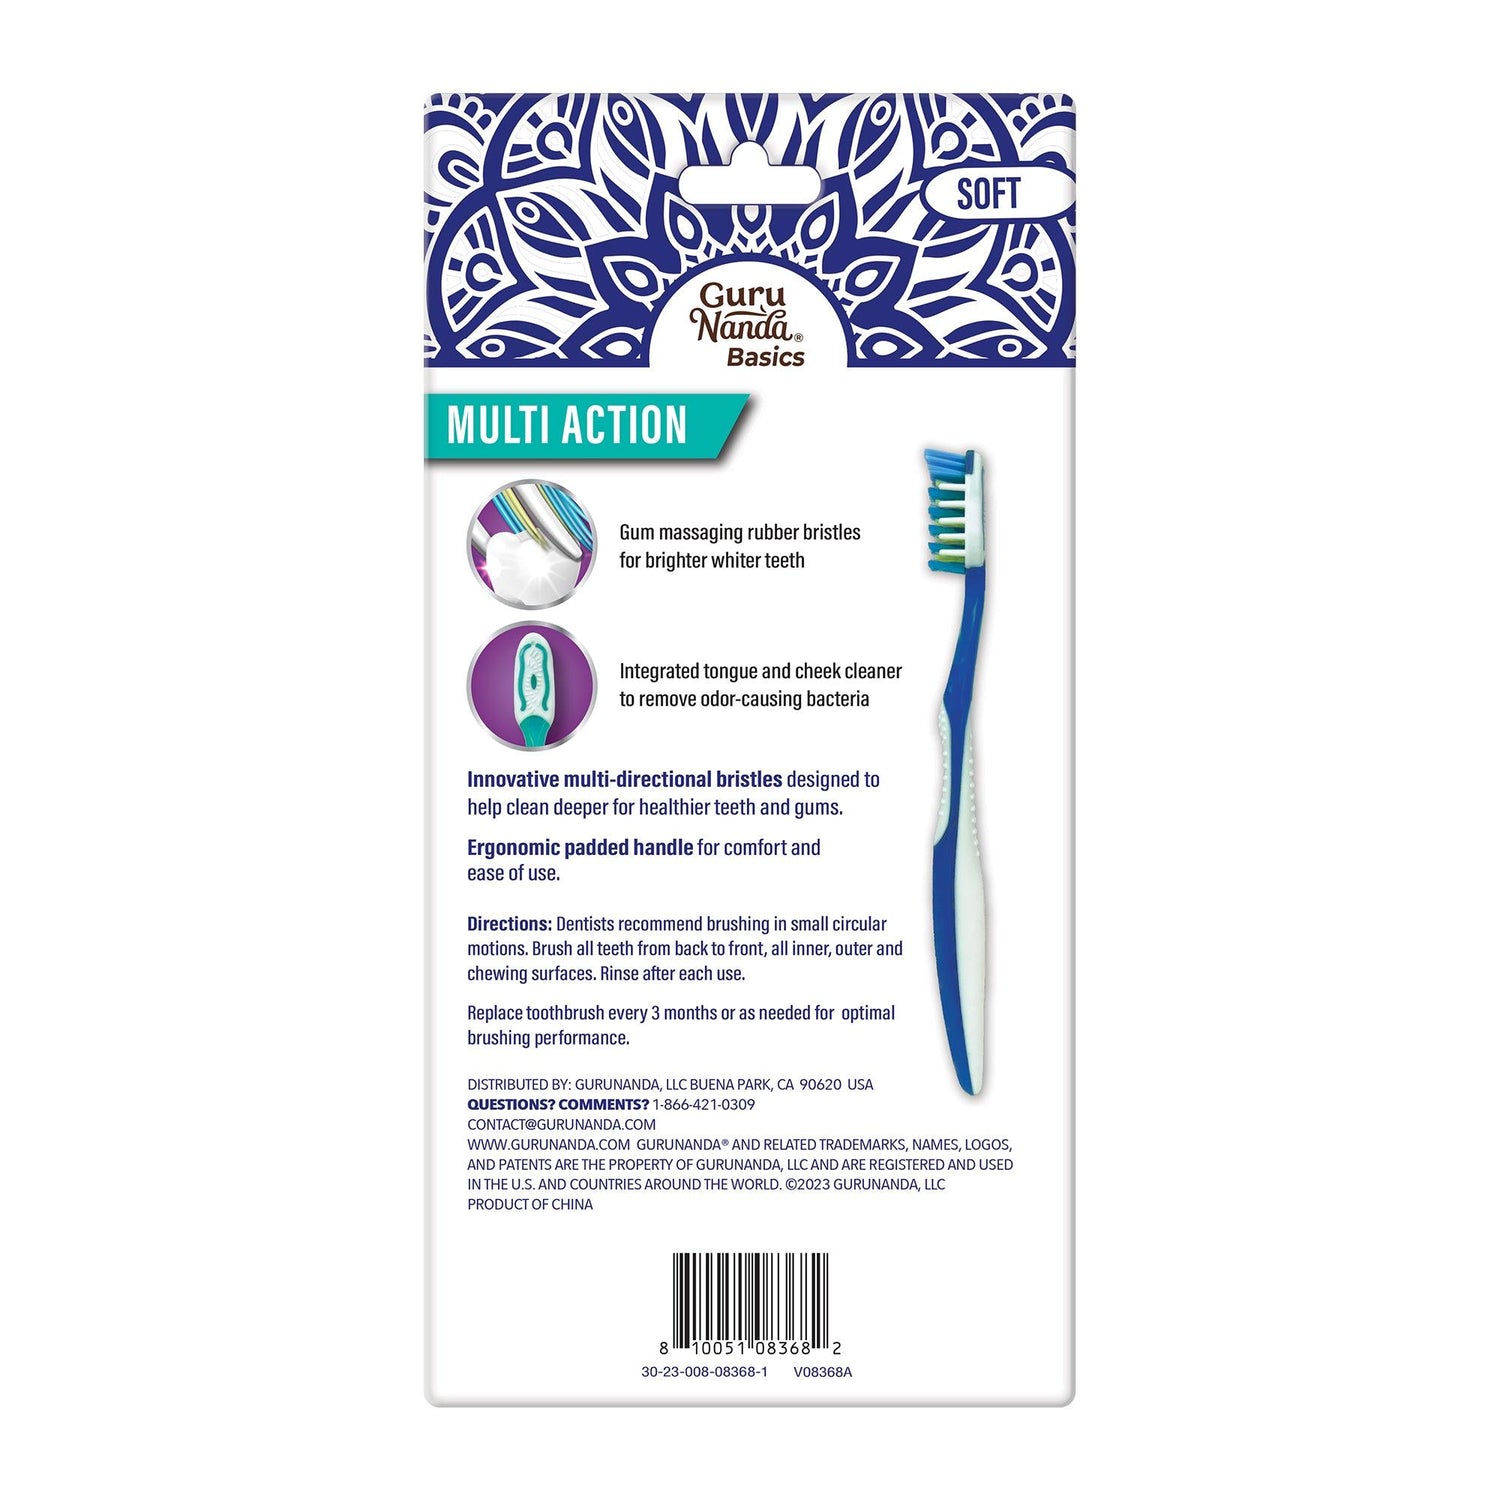 Multi-Action Toothbrush with Tongue Cleaner - Pack of 8 - GuruNanda